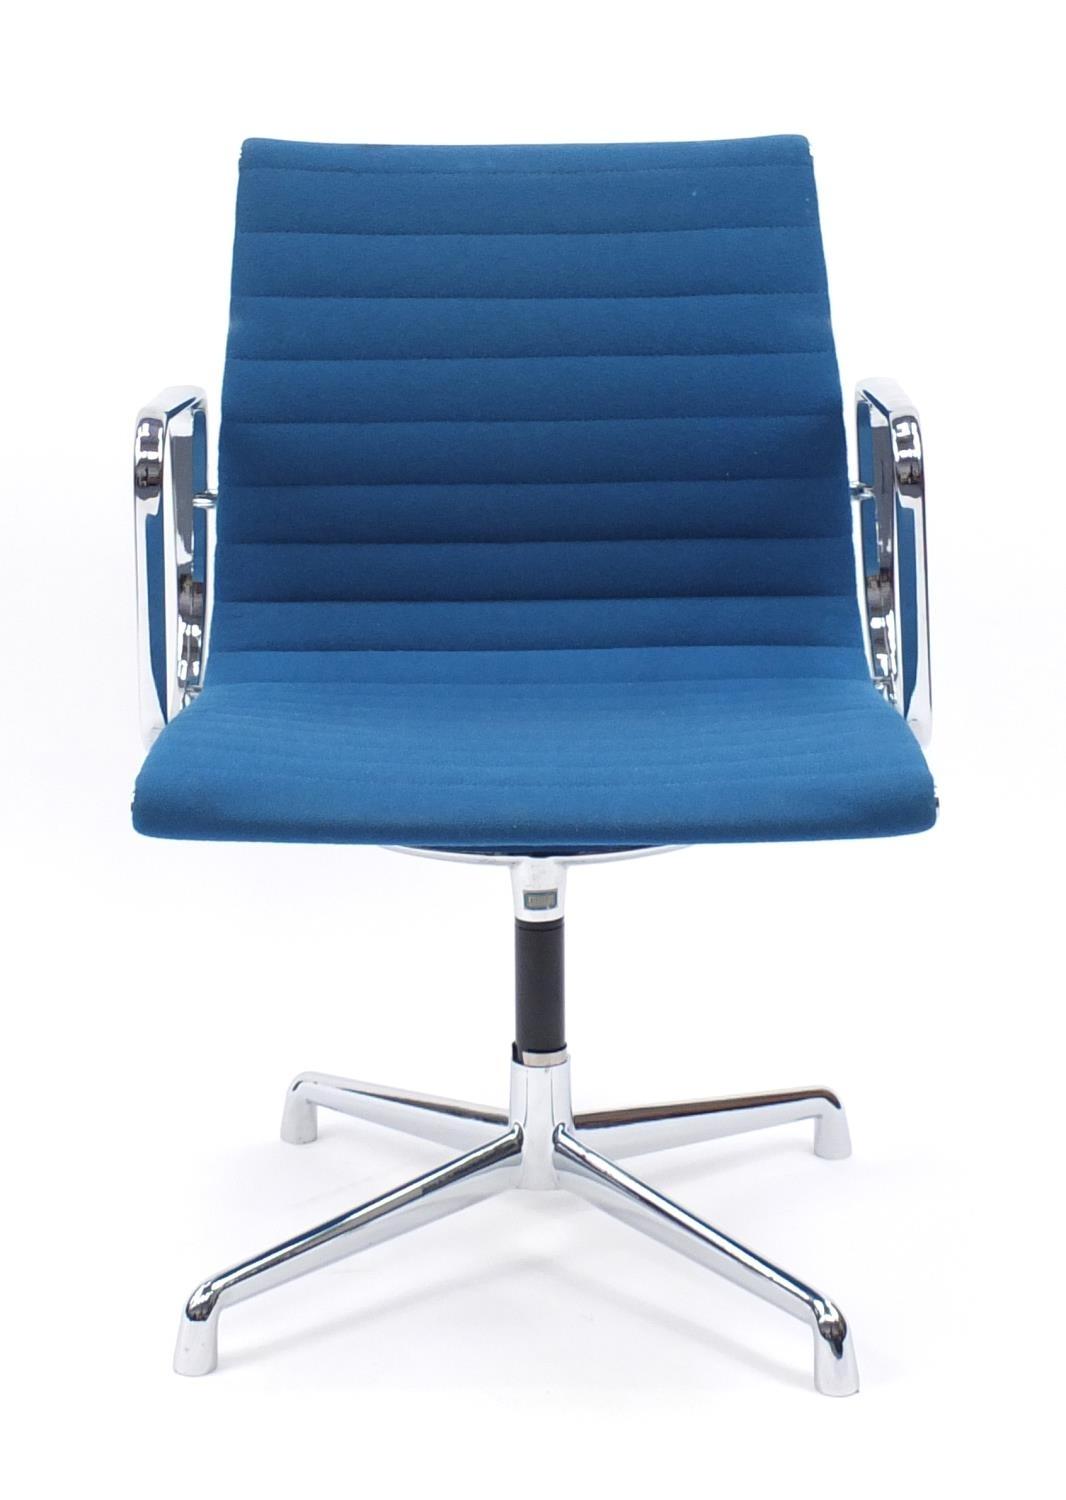 Charles and Ray Eames EA107 design desk chair with turquoise upholstery, 82cm high :For Further - Image 2 of 4